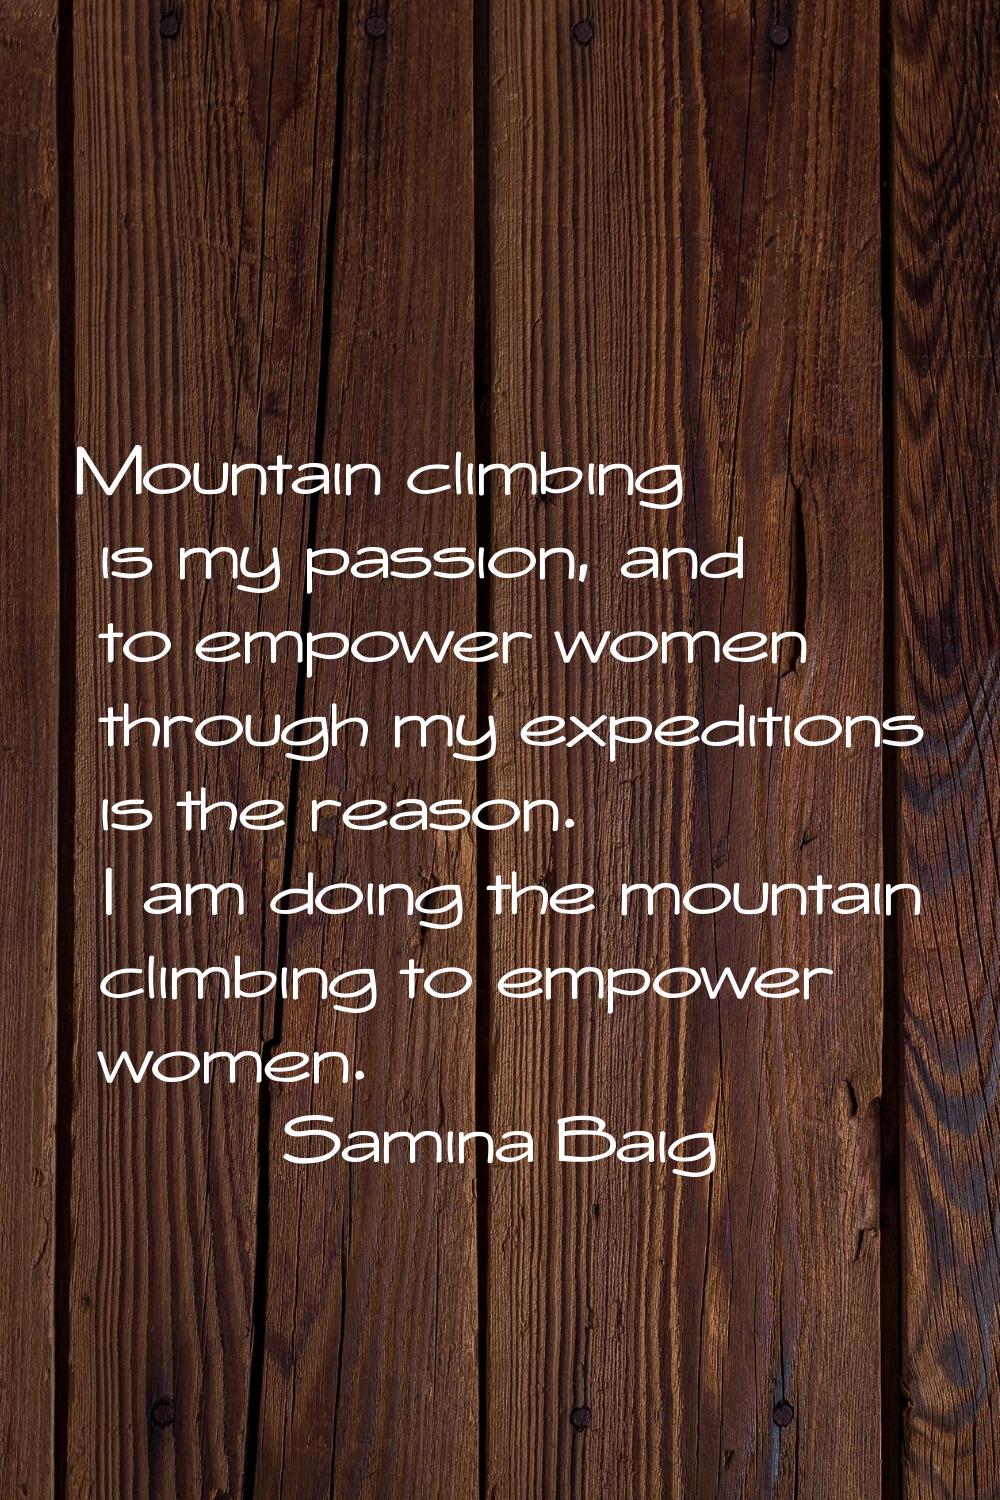 Mountain climbing is my passion, and to empower women through my expeditions is the reason. I am do